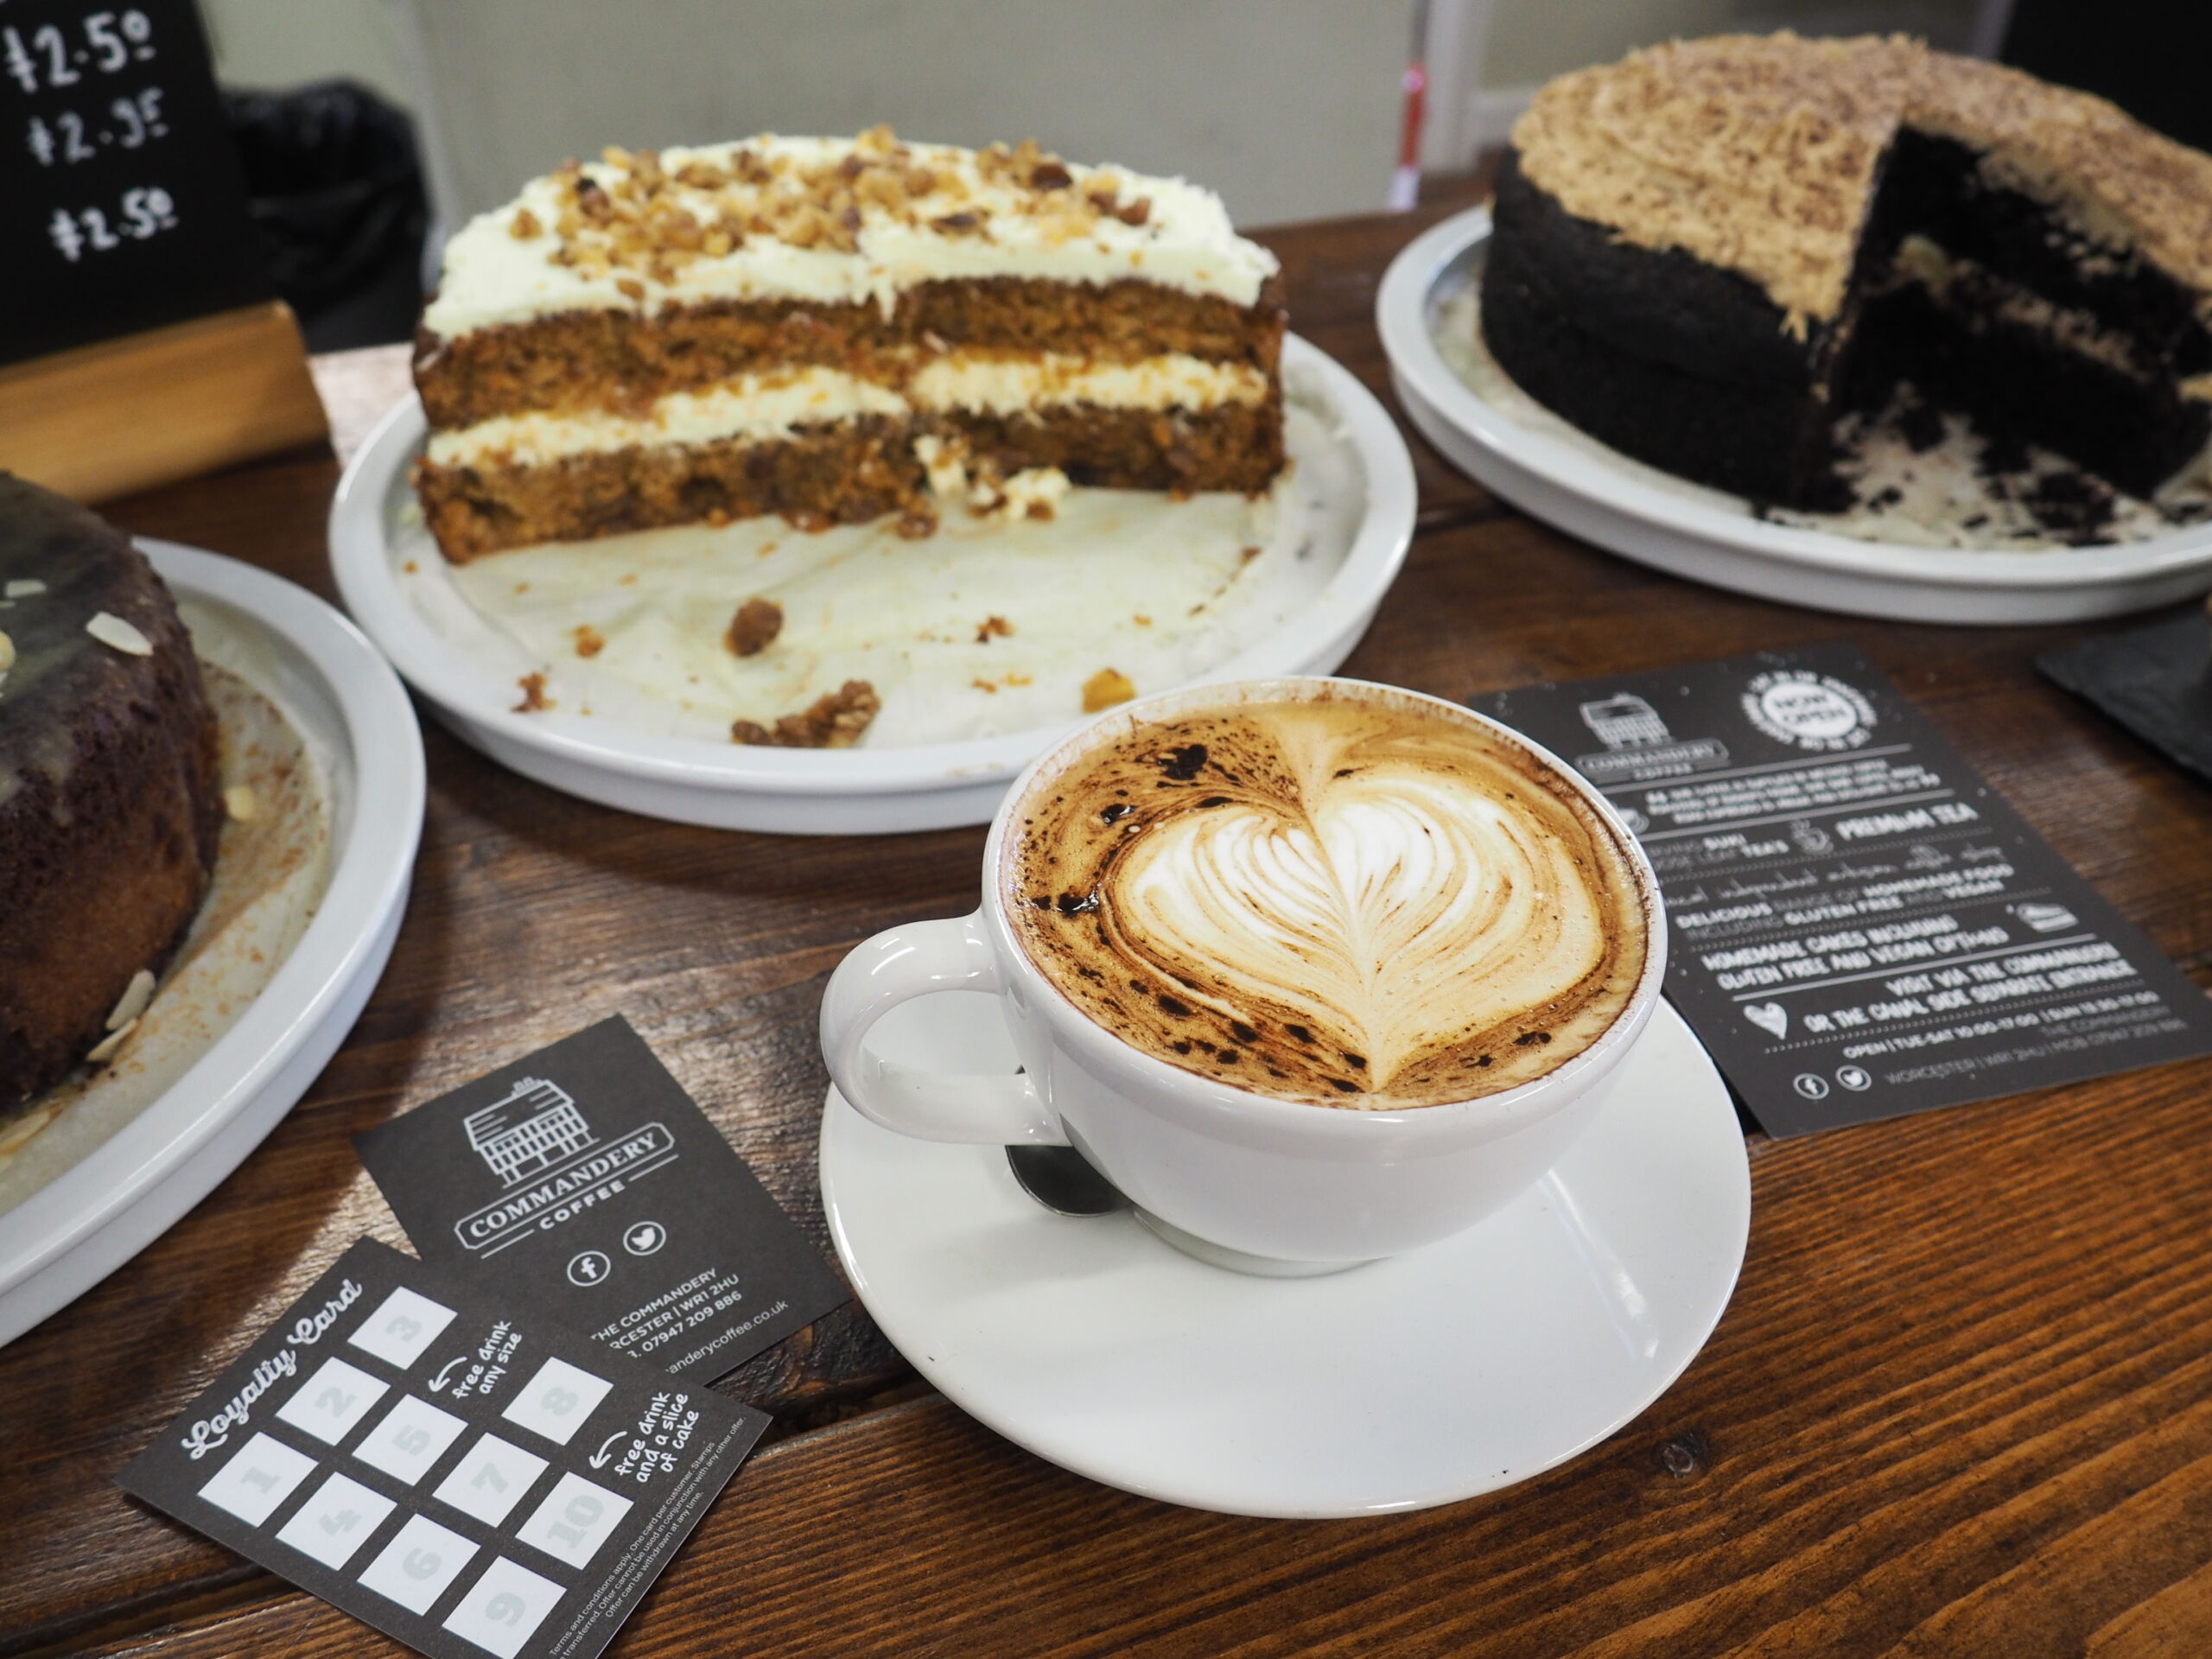 A photo of coffee and cake in Commandery Coffee cafe.